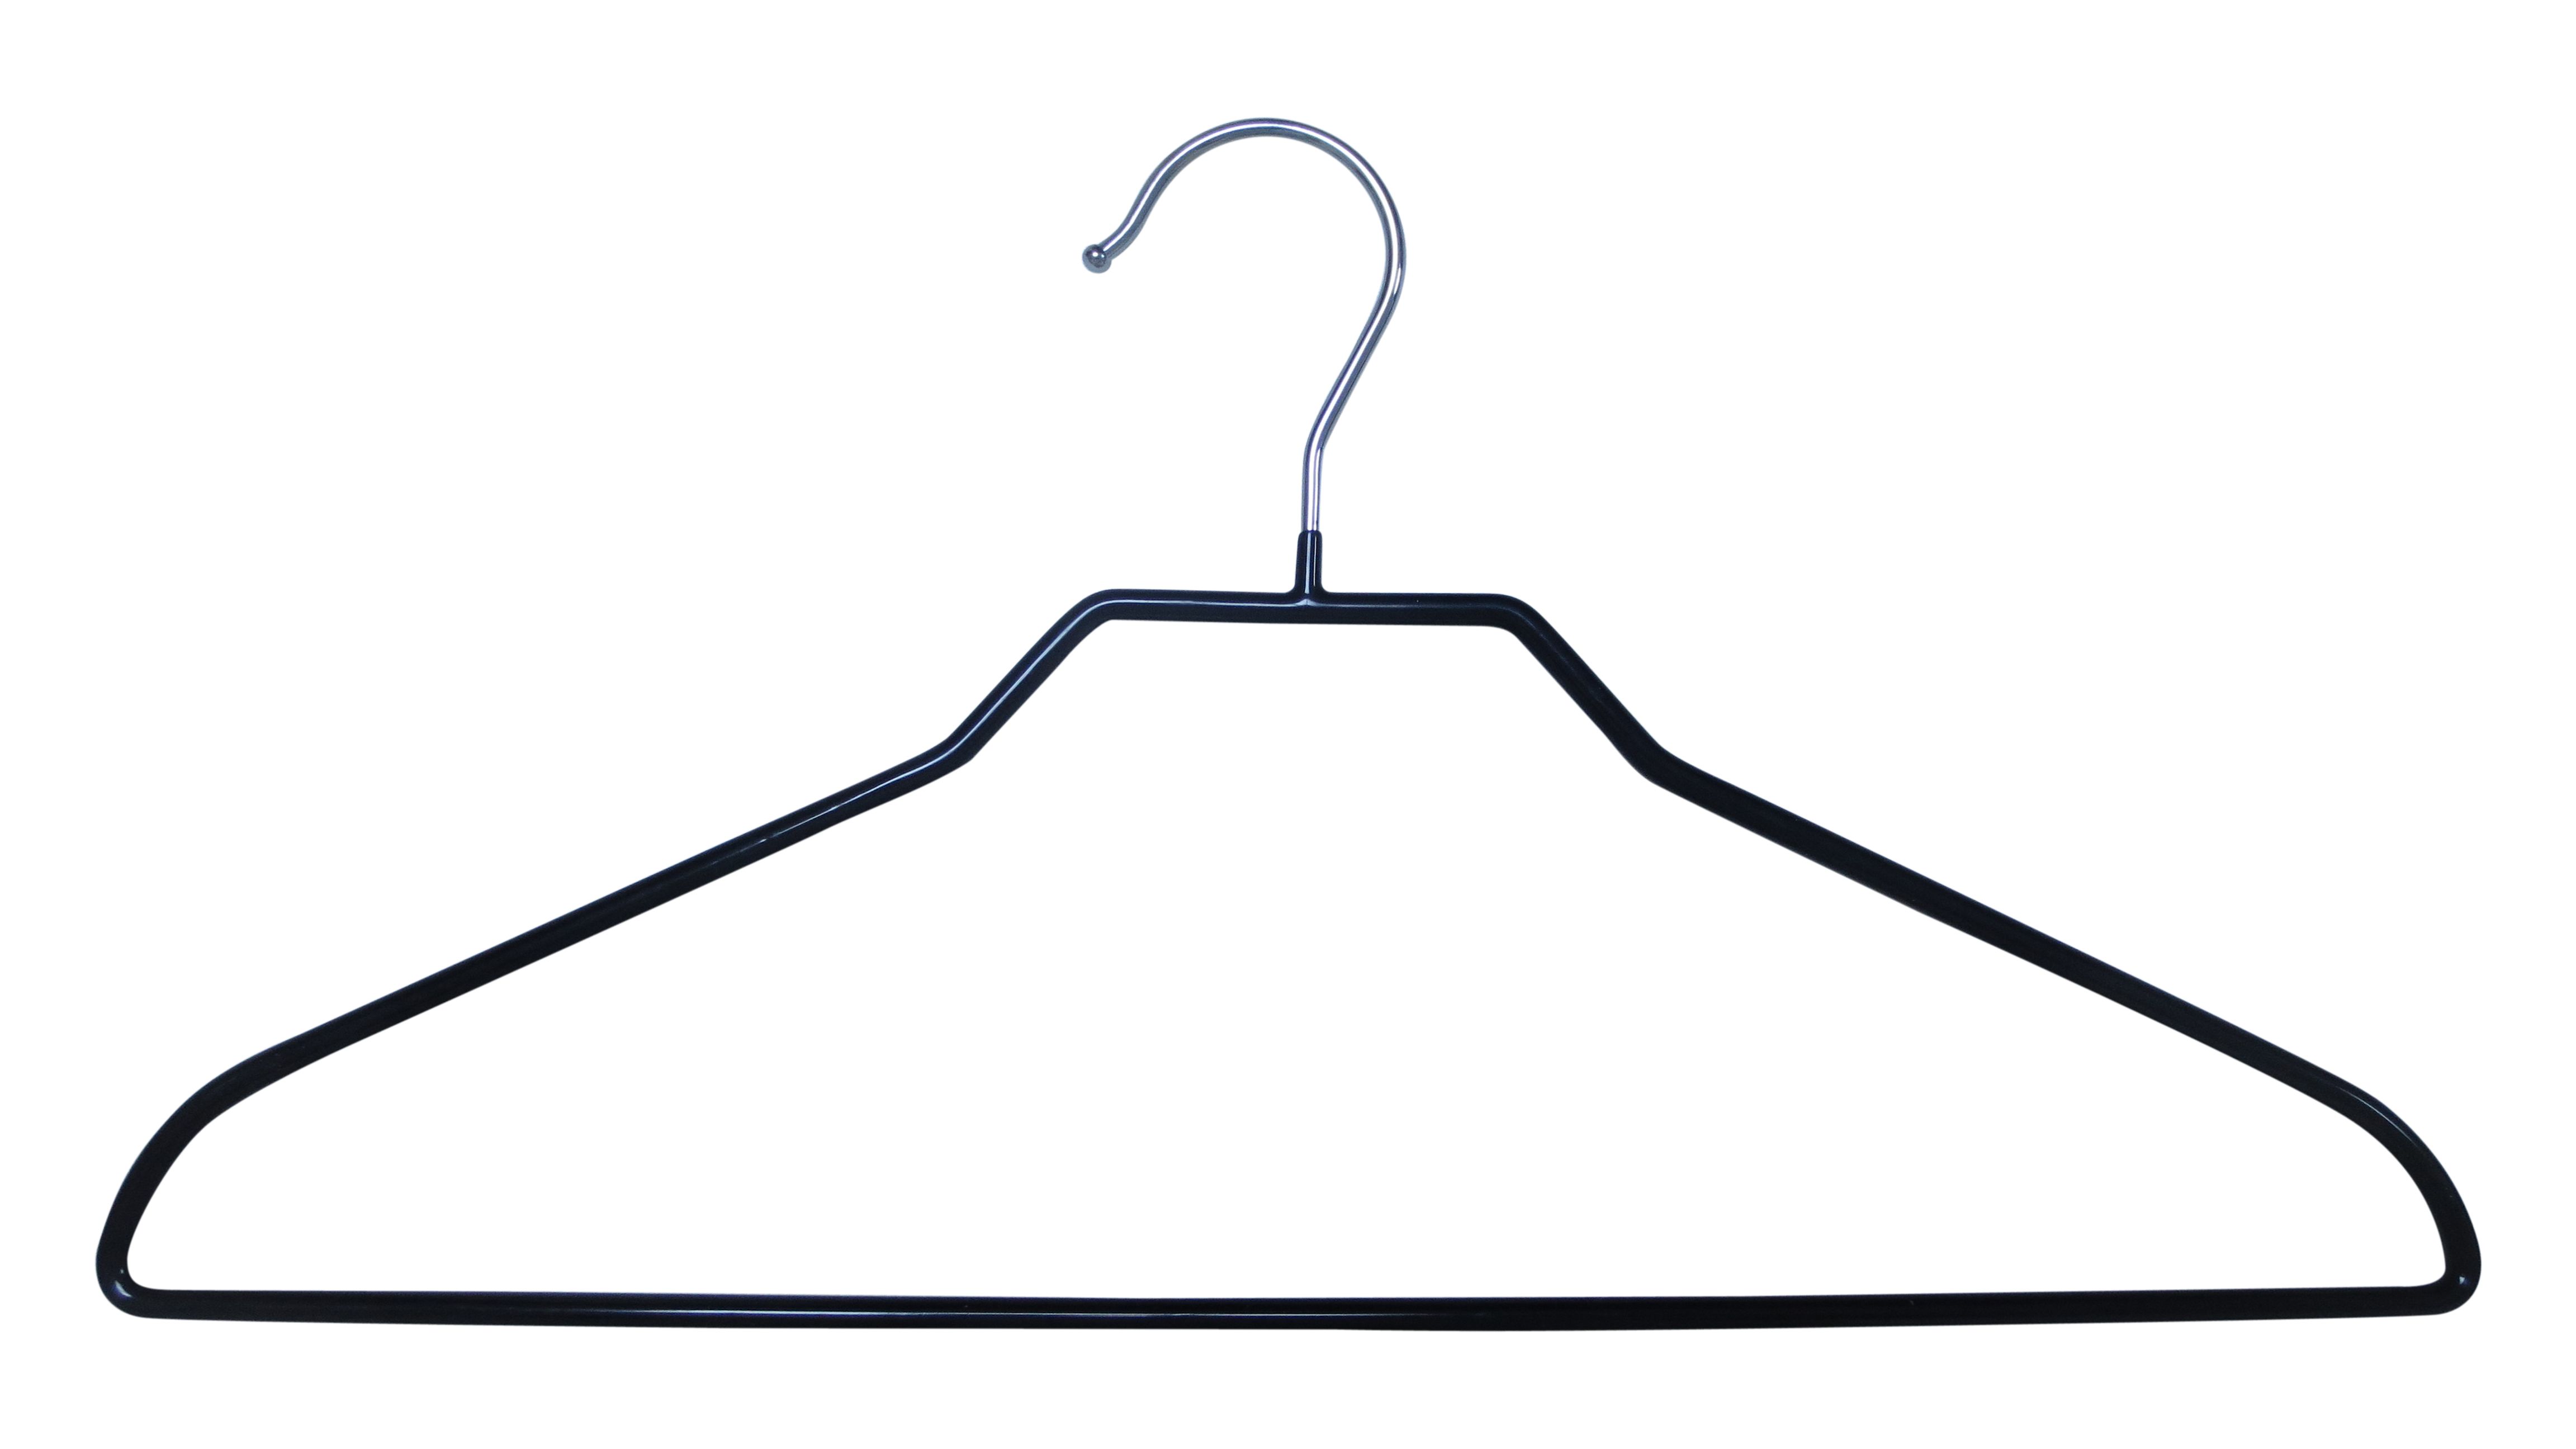 Form Black Metal Clothes hangers, Pack of 5